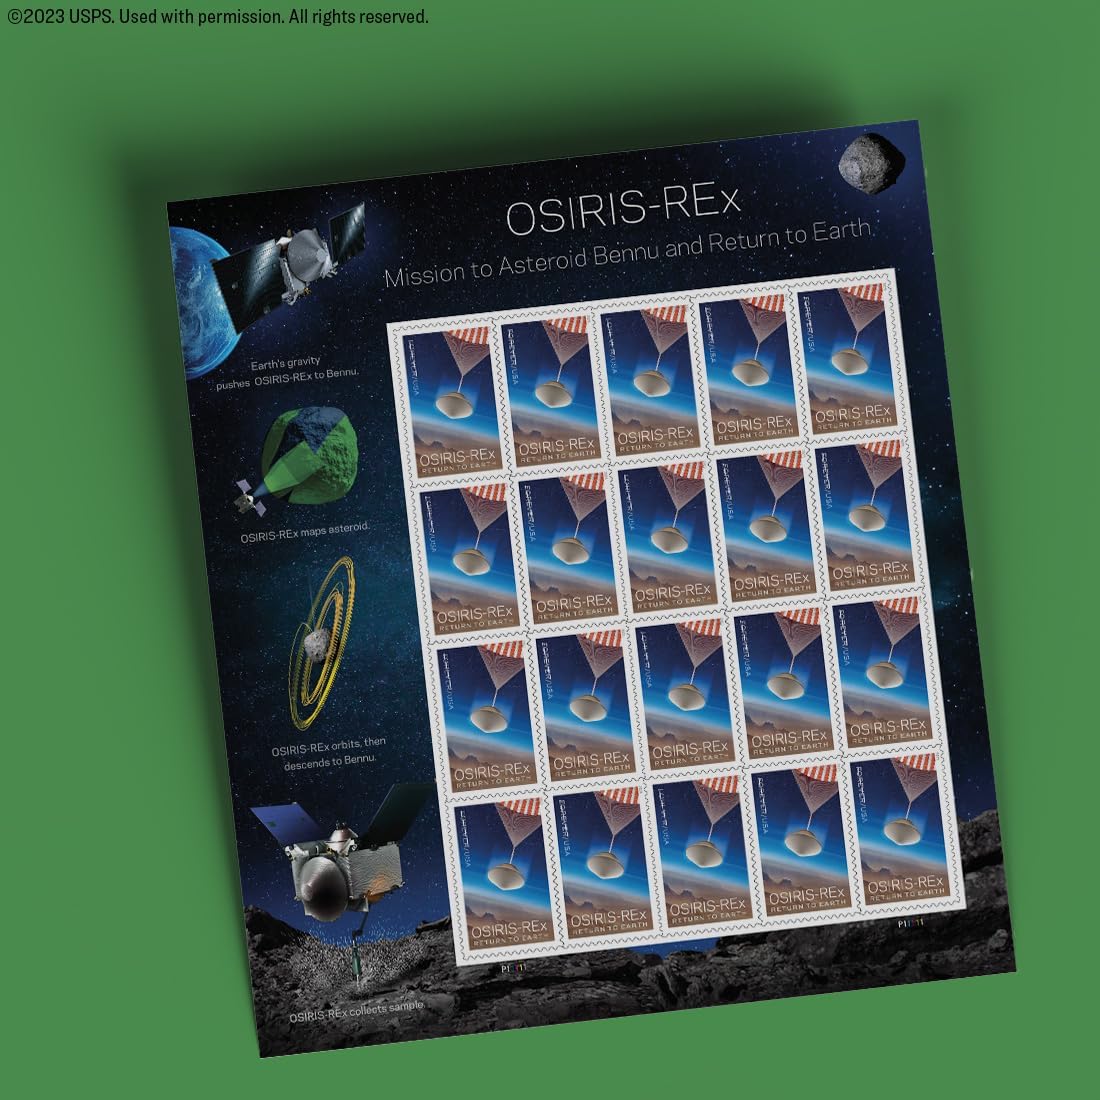 Osiris-REx Mission to Asteroid Bennu and Return to Earth Forever Postage Stamps